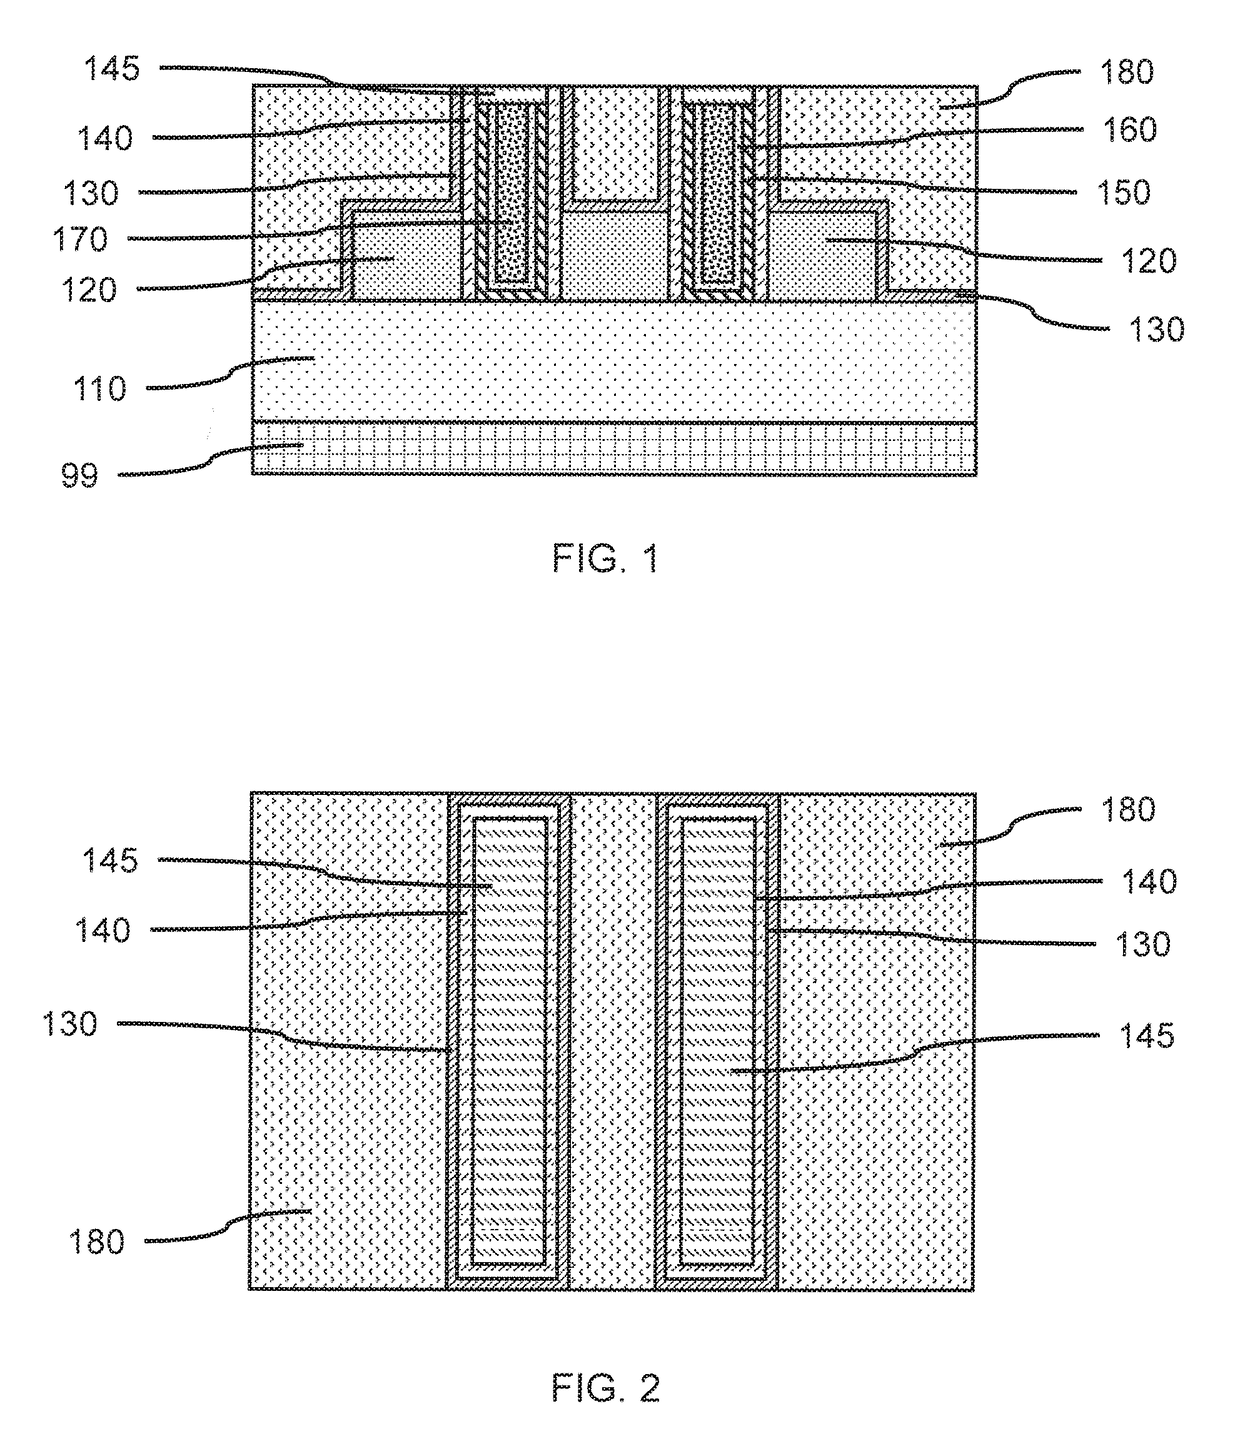 Fabrication of self-aligned gate contacts and source/drain contacts directly above gate electrodes and source/drains